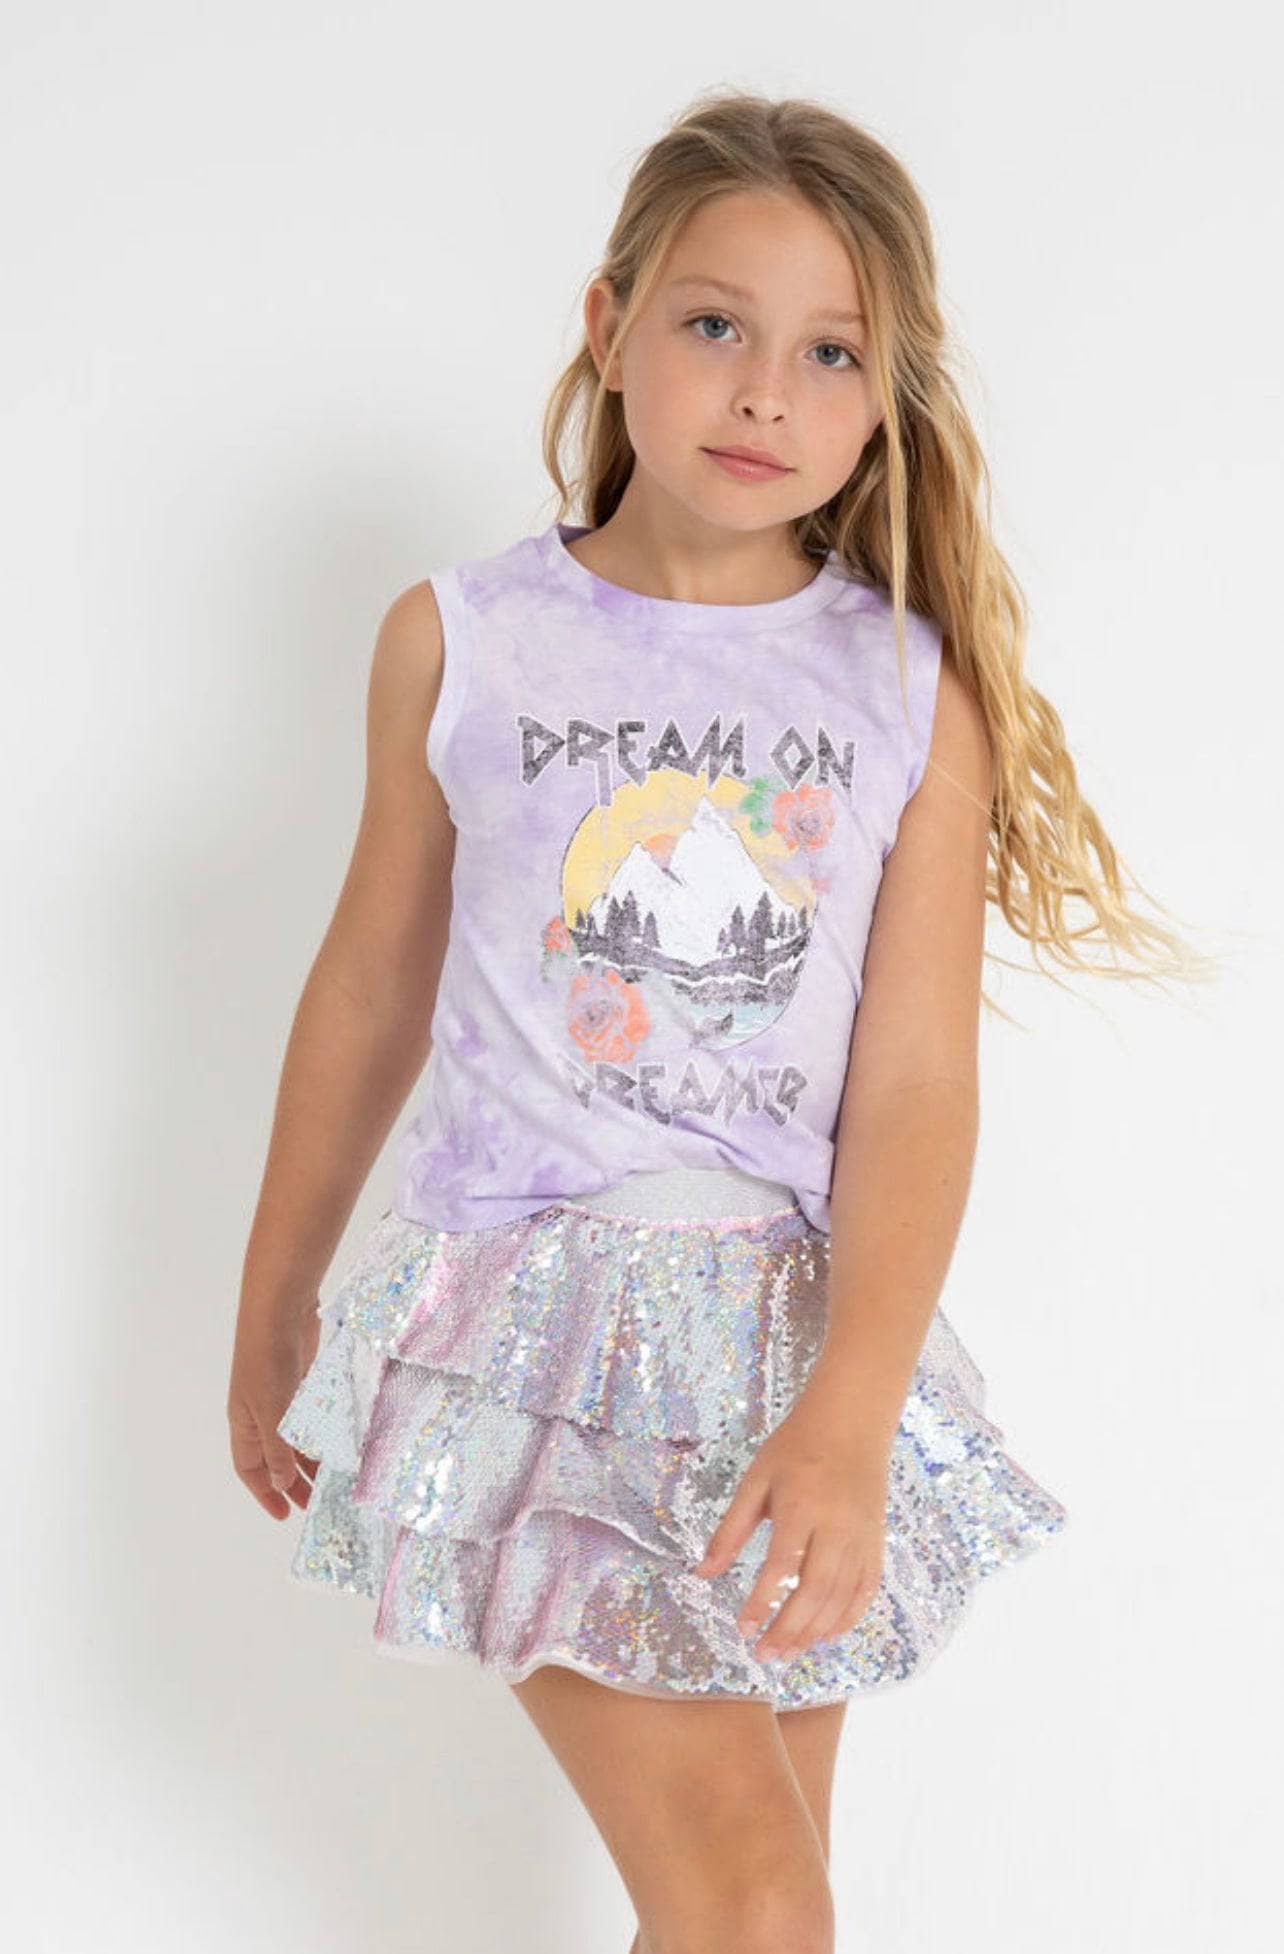 Dream On Muscle T-Shirt